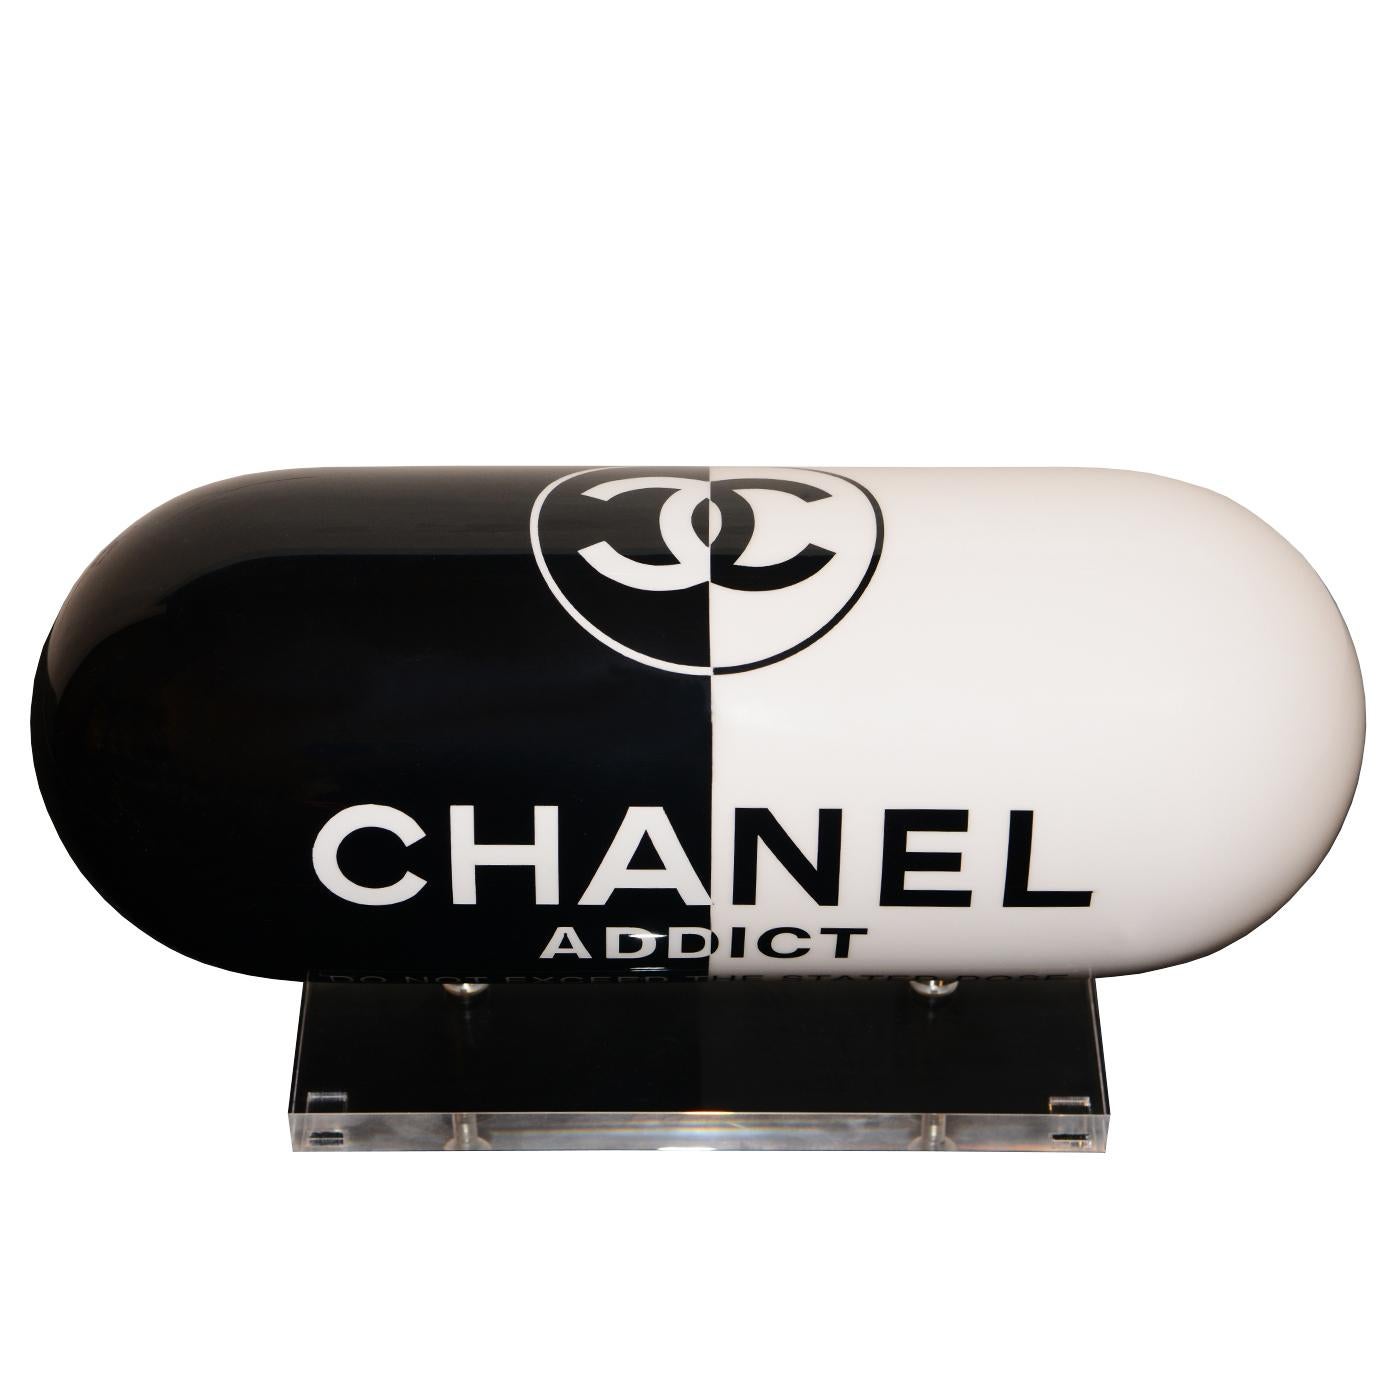 Chanel Addict black & white Pill sculpture with all
structure in resin in lacquered finish. On acrylic base.
Limited Edition of 8 pieces, numbered and signed
by Eric Salin.